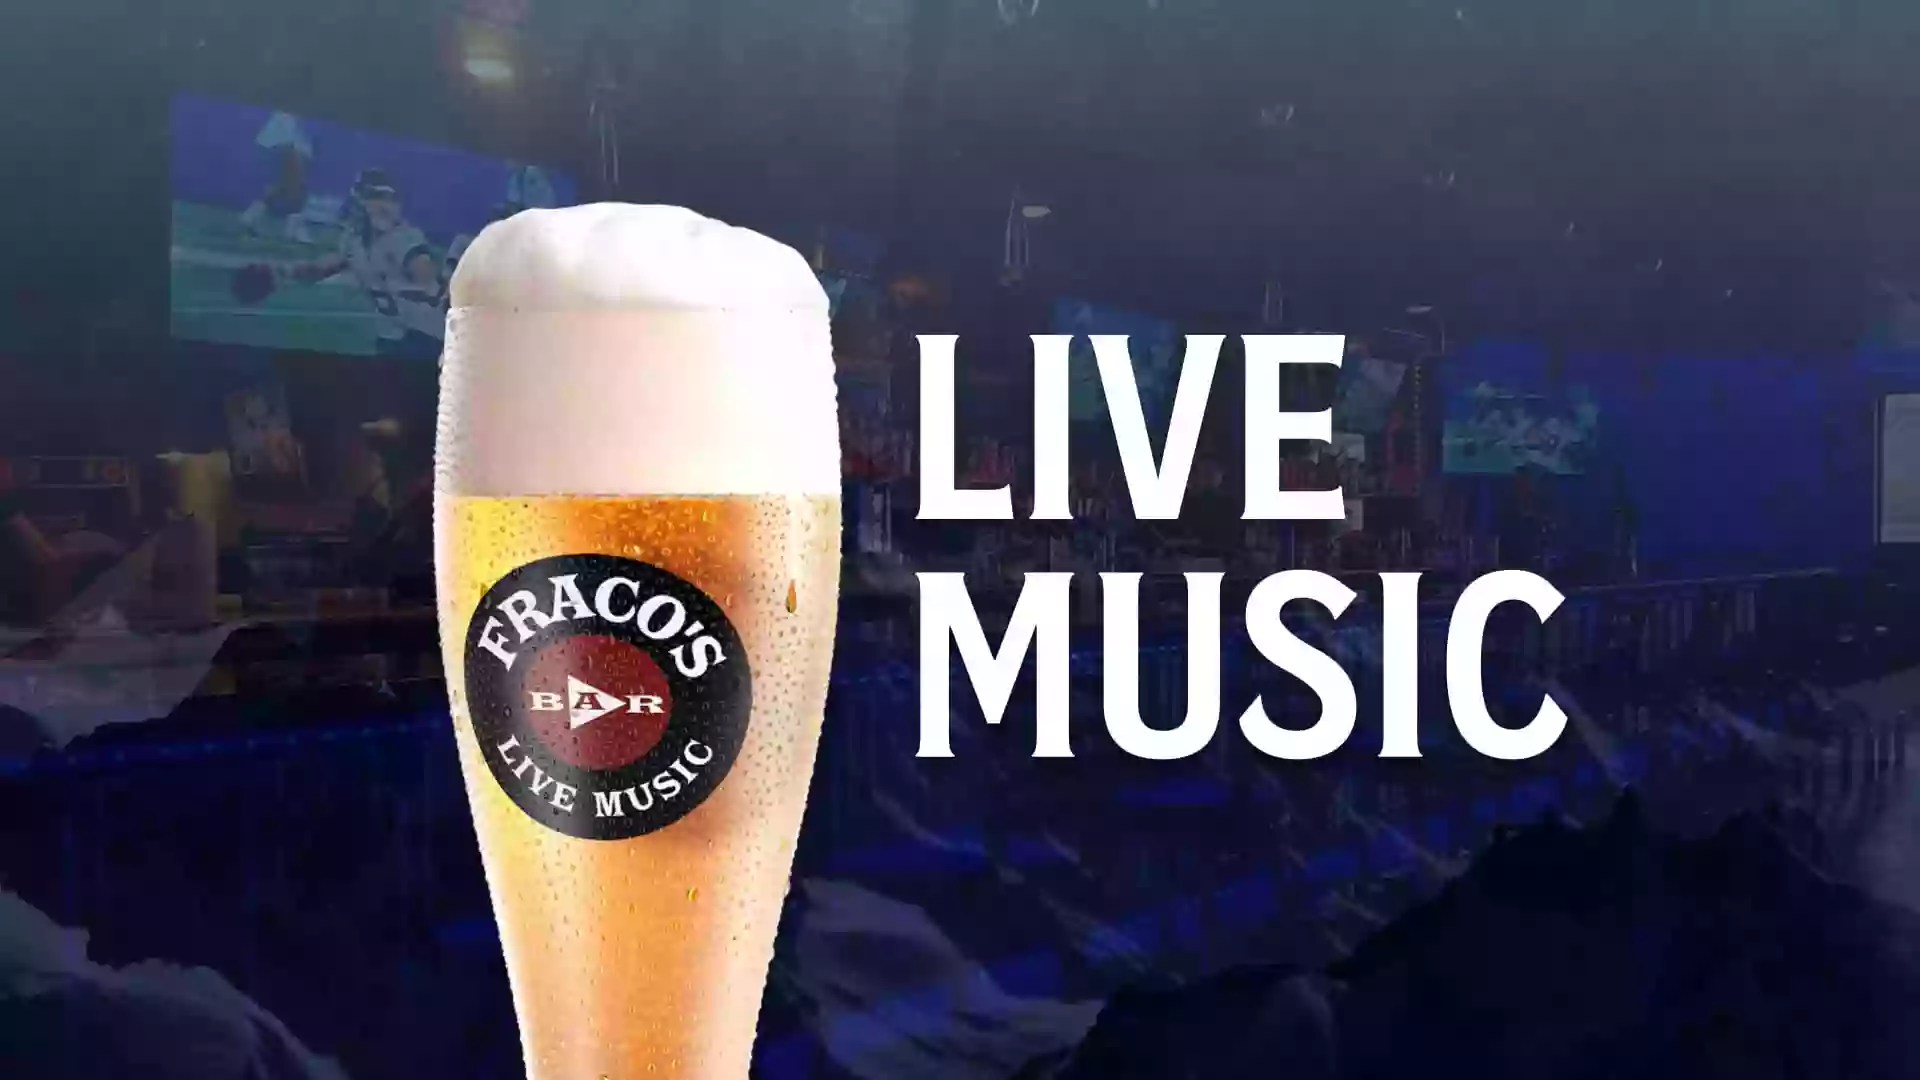 Fraco's Bar and Live Music